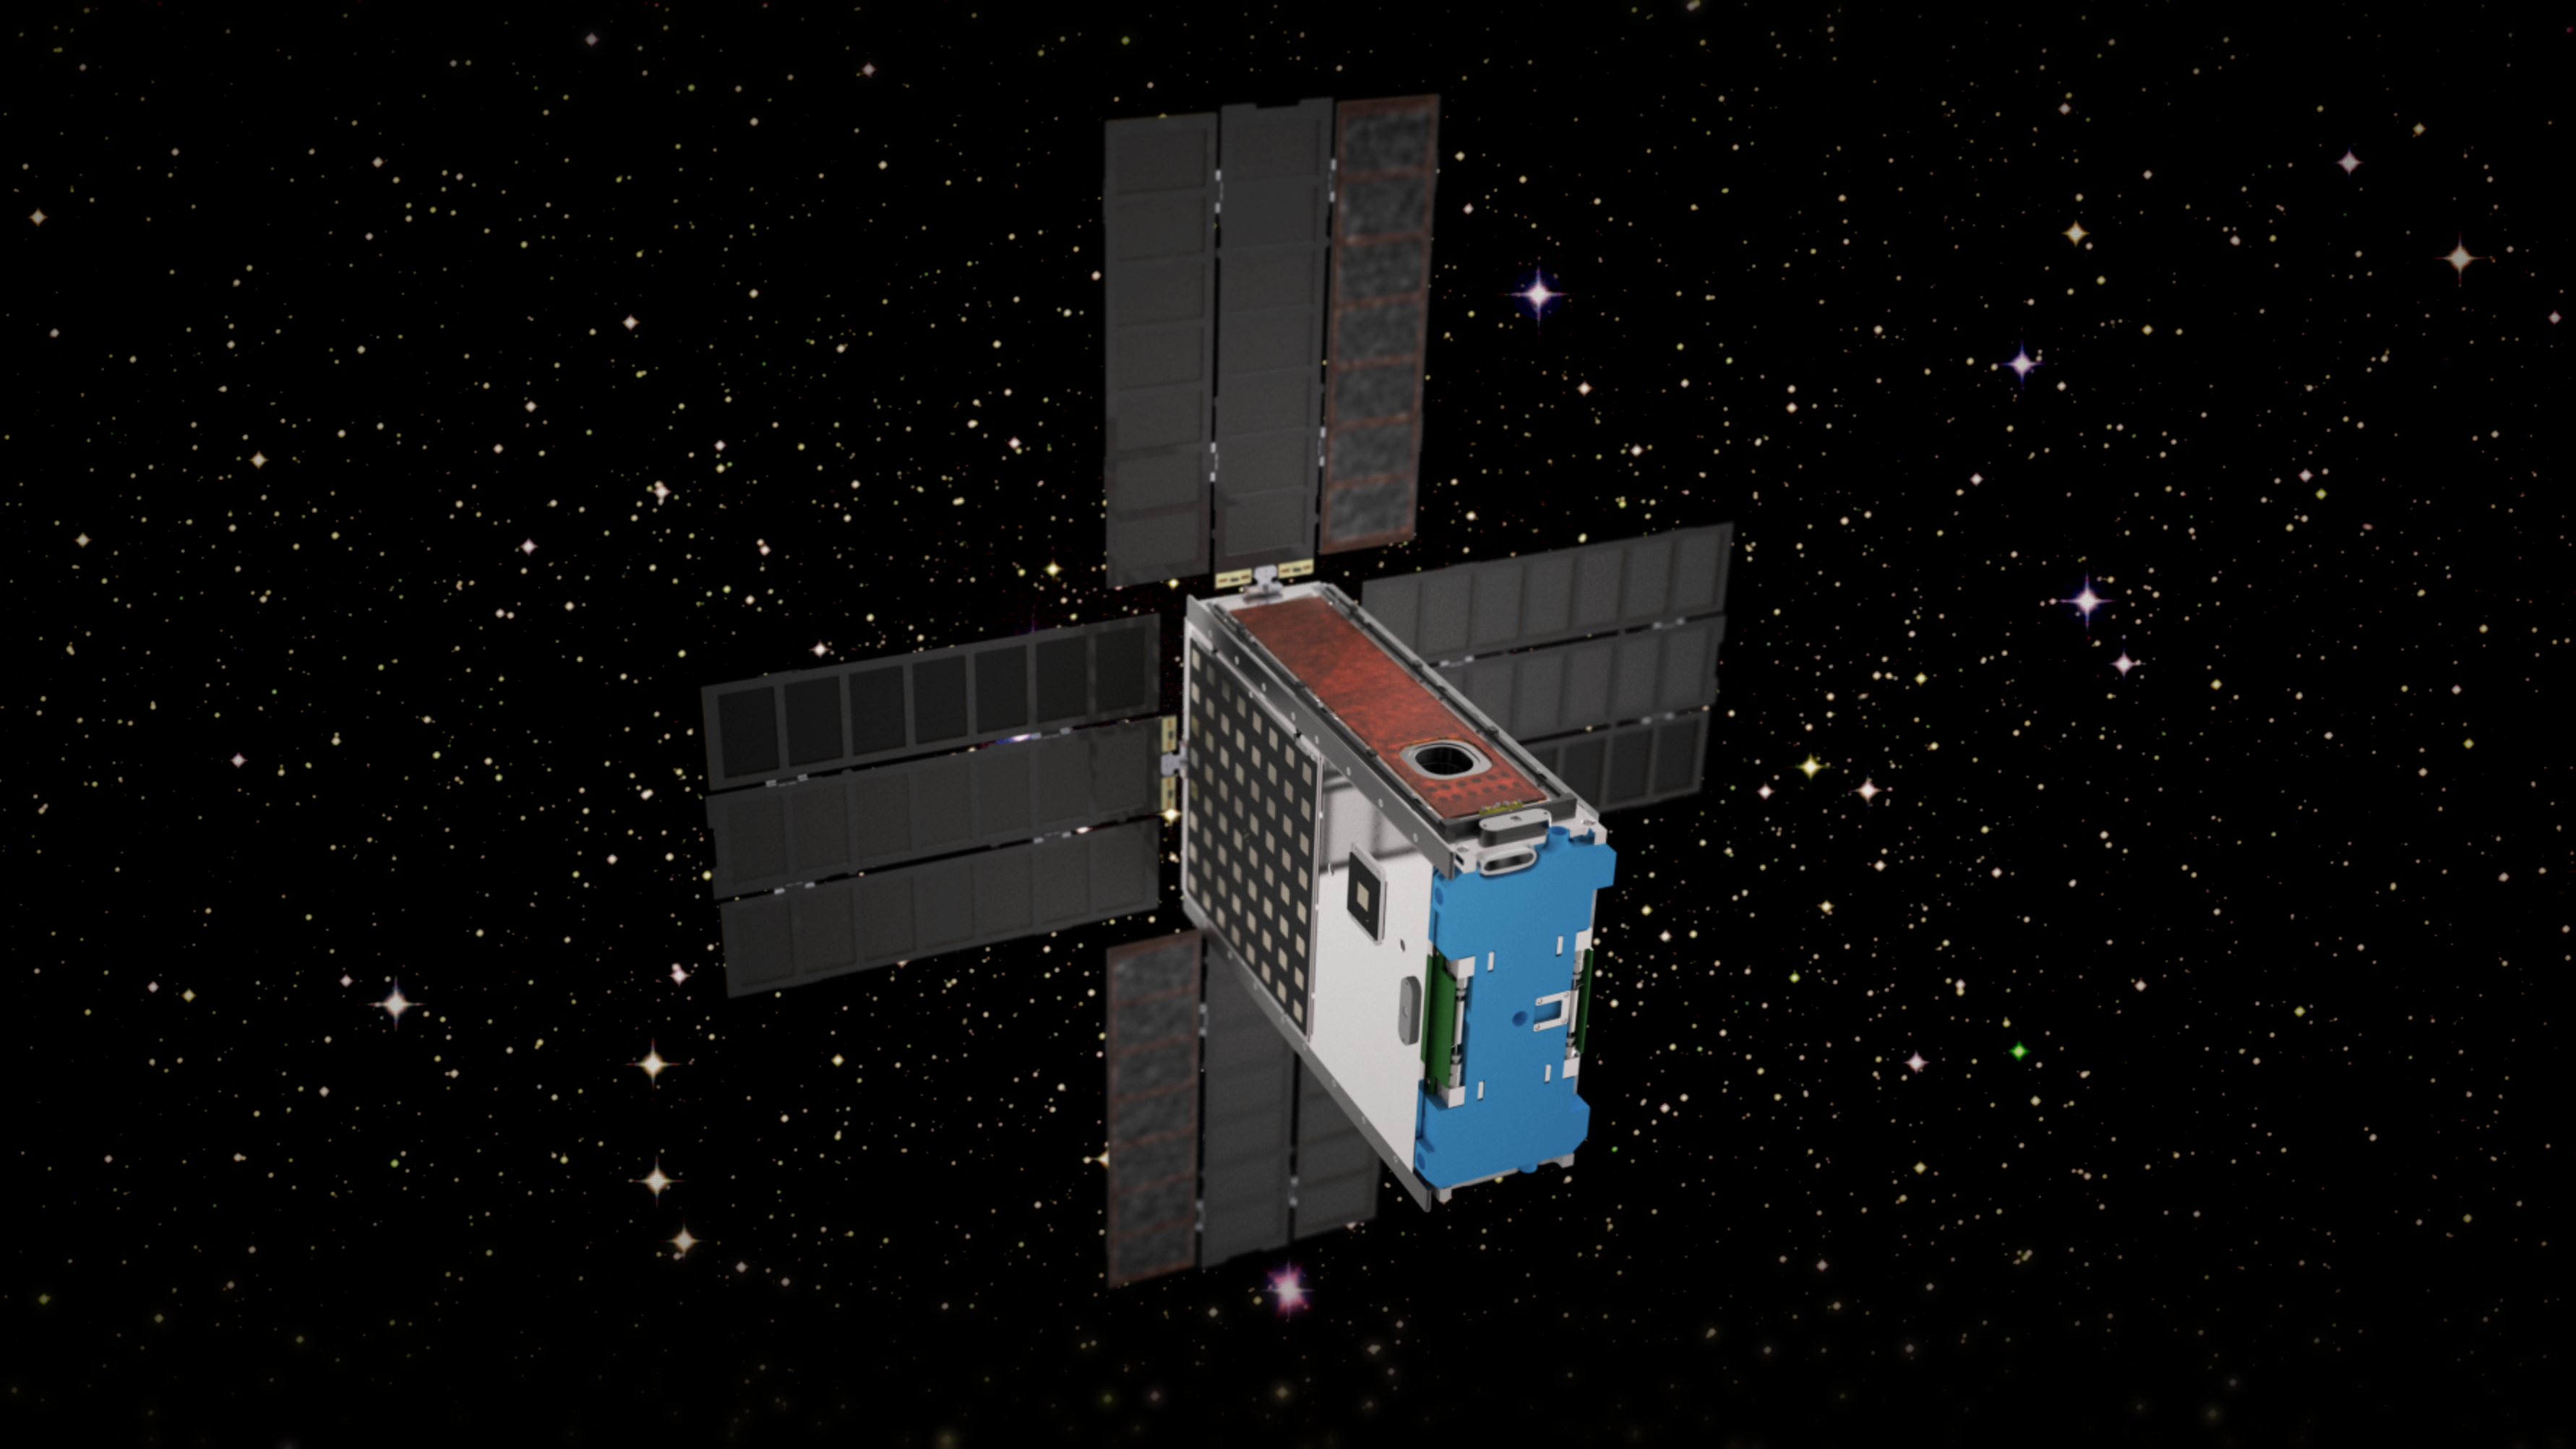 A small satellite with four solar panels floats in space.